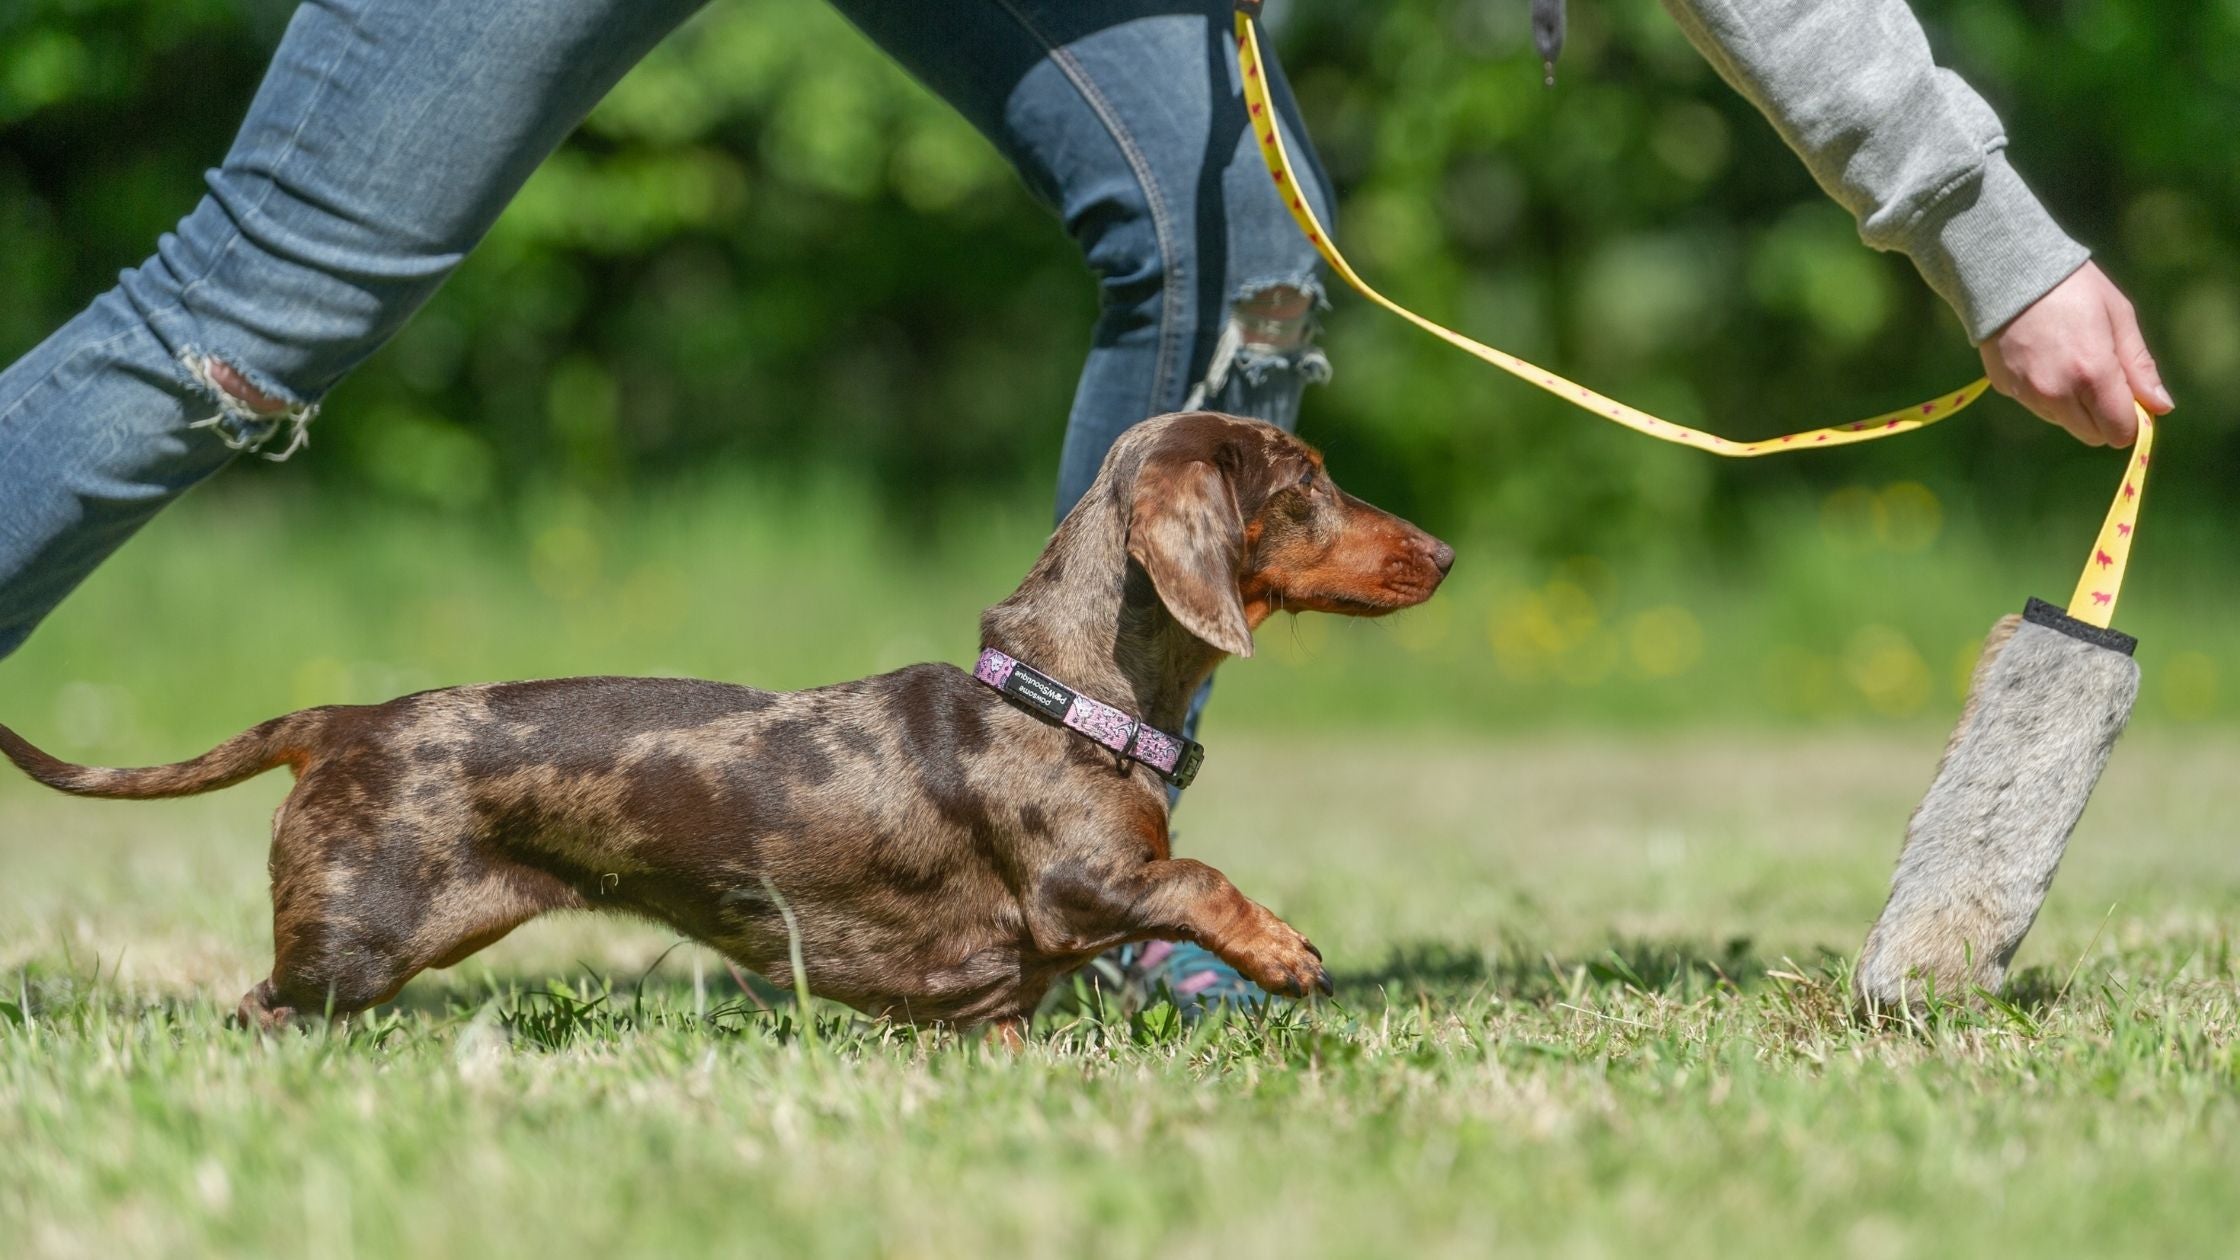 dachshund following squeaky chaser toy for dogs